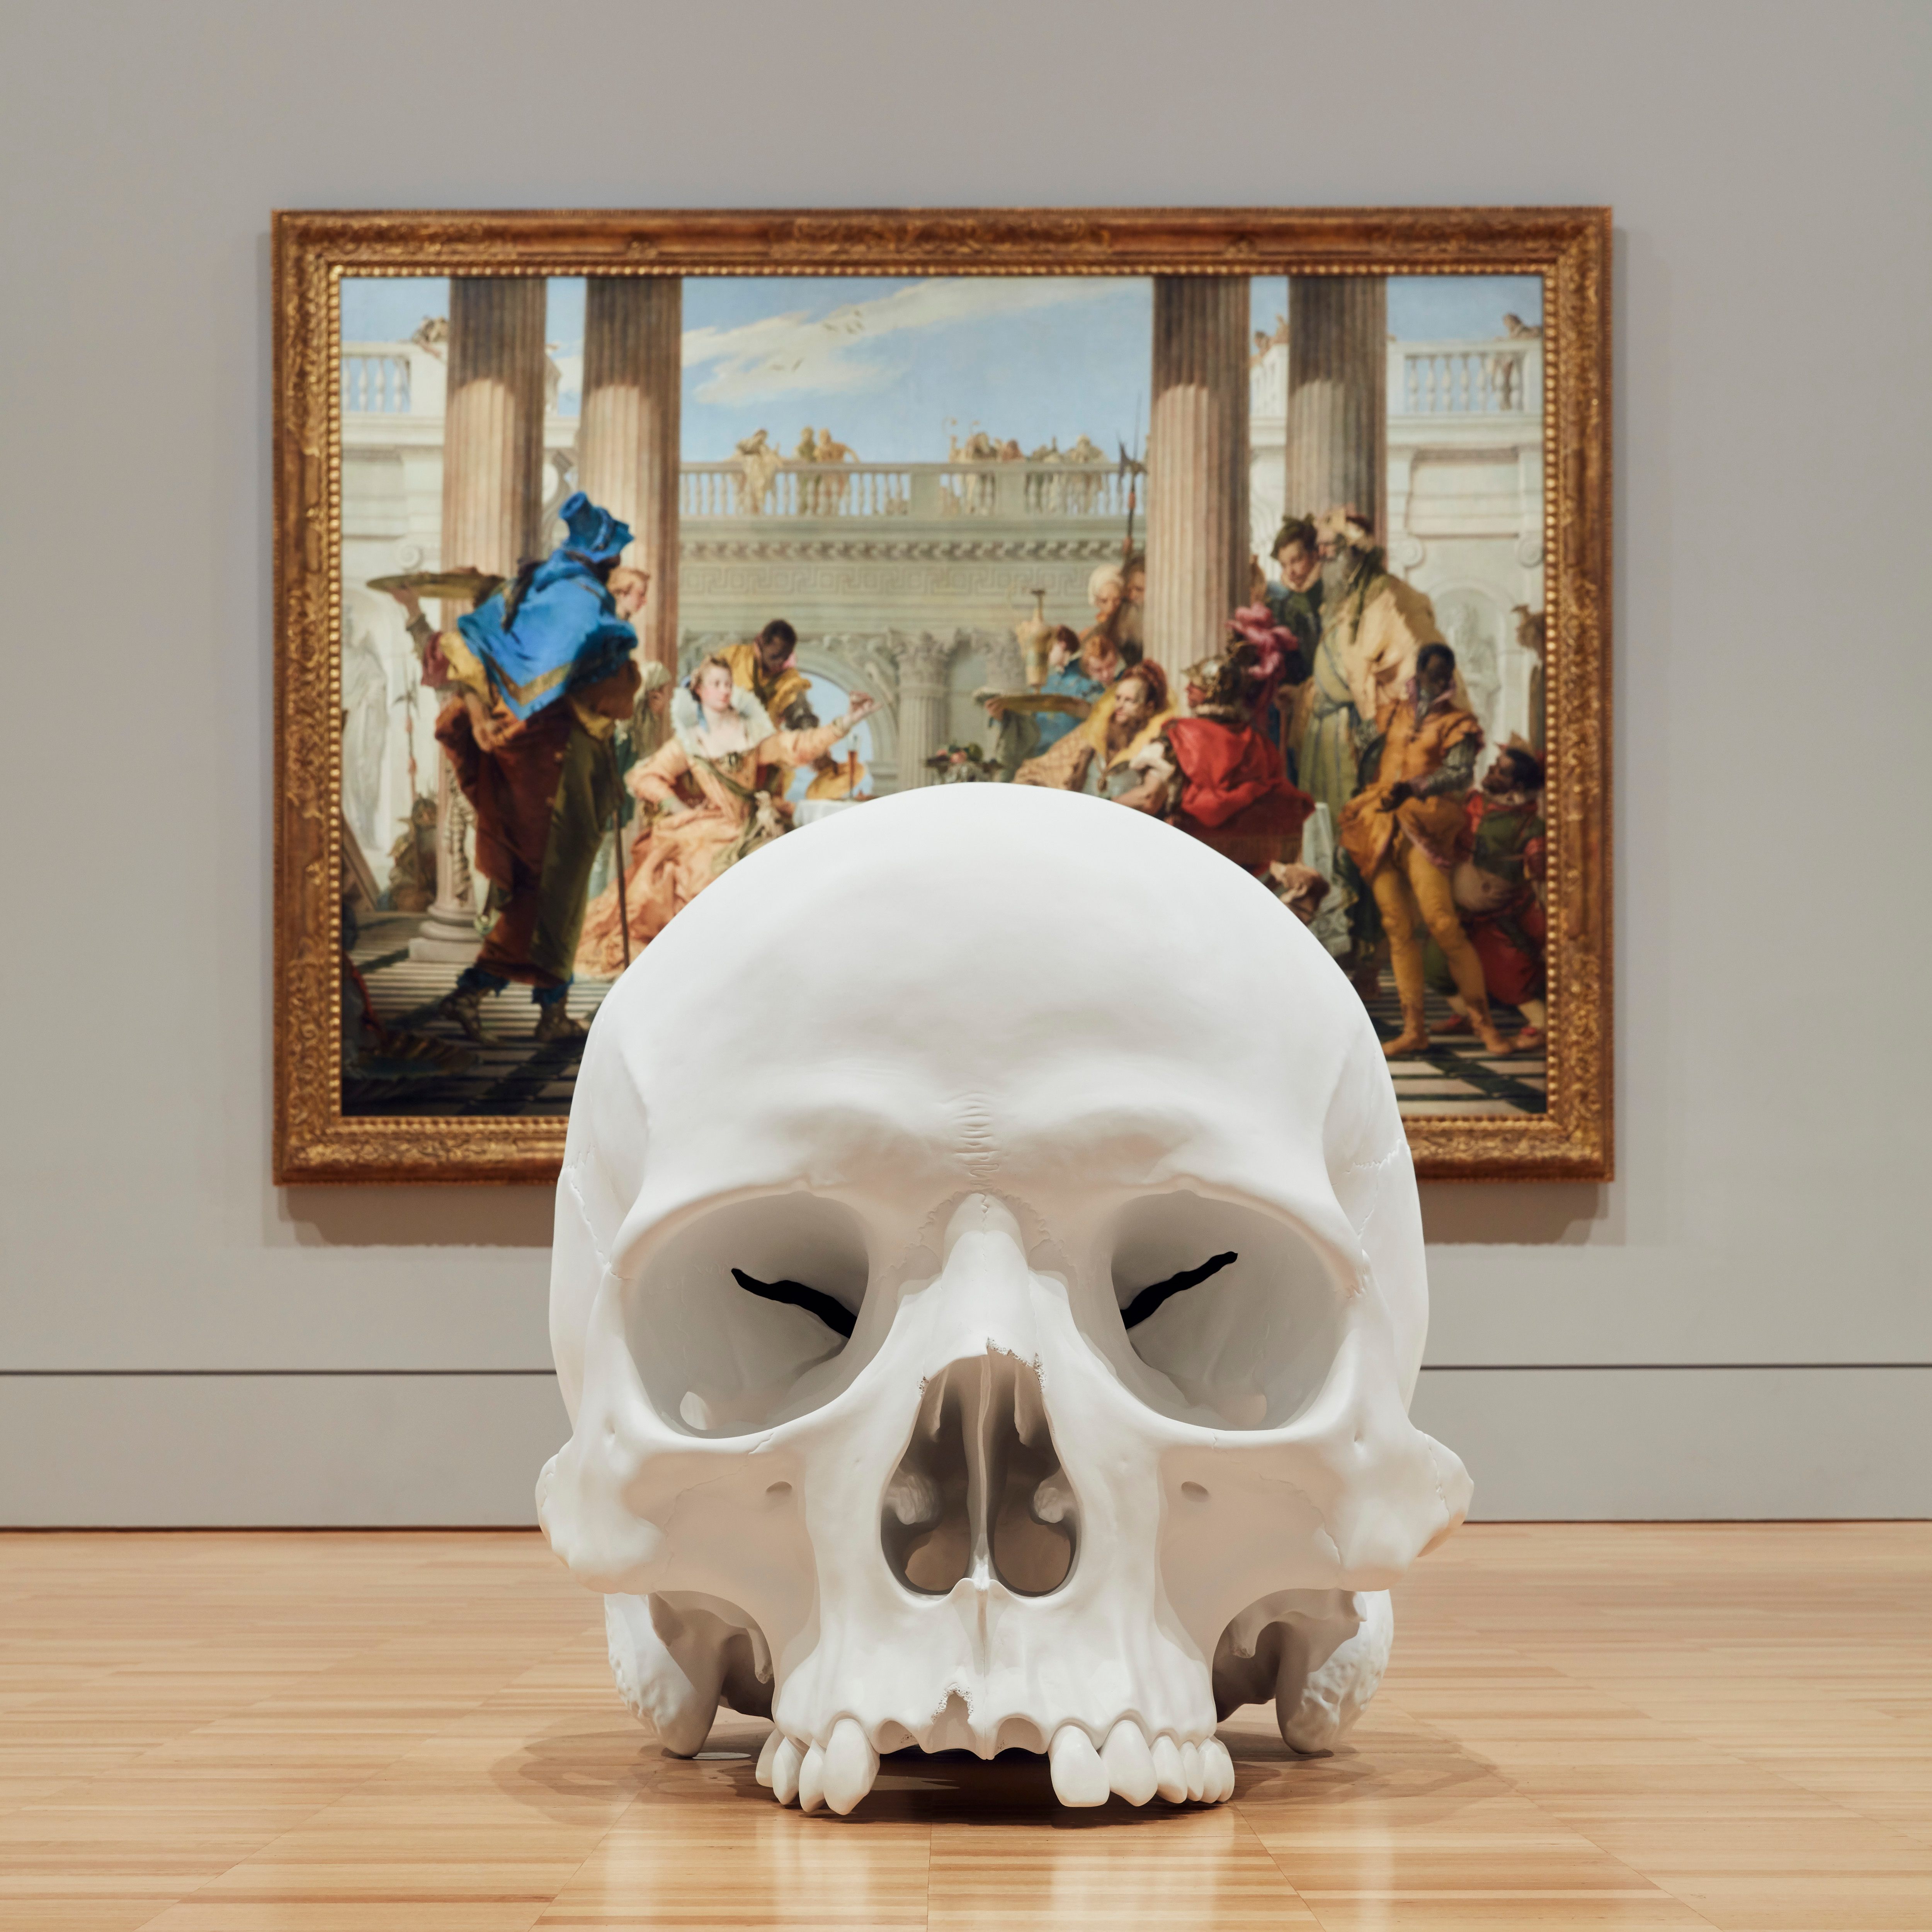 This Australian Art Museum Is Filled With Giant Skulls - Atlas Obscura